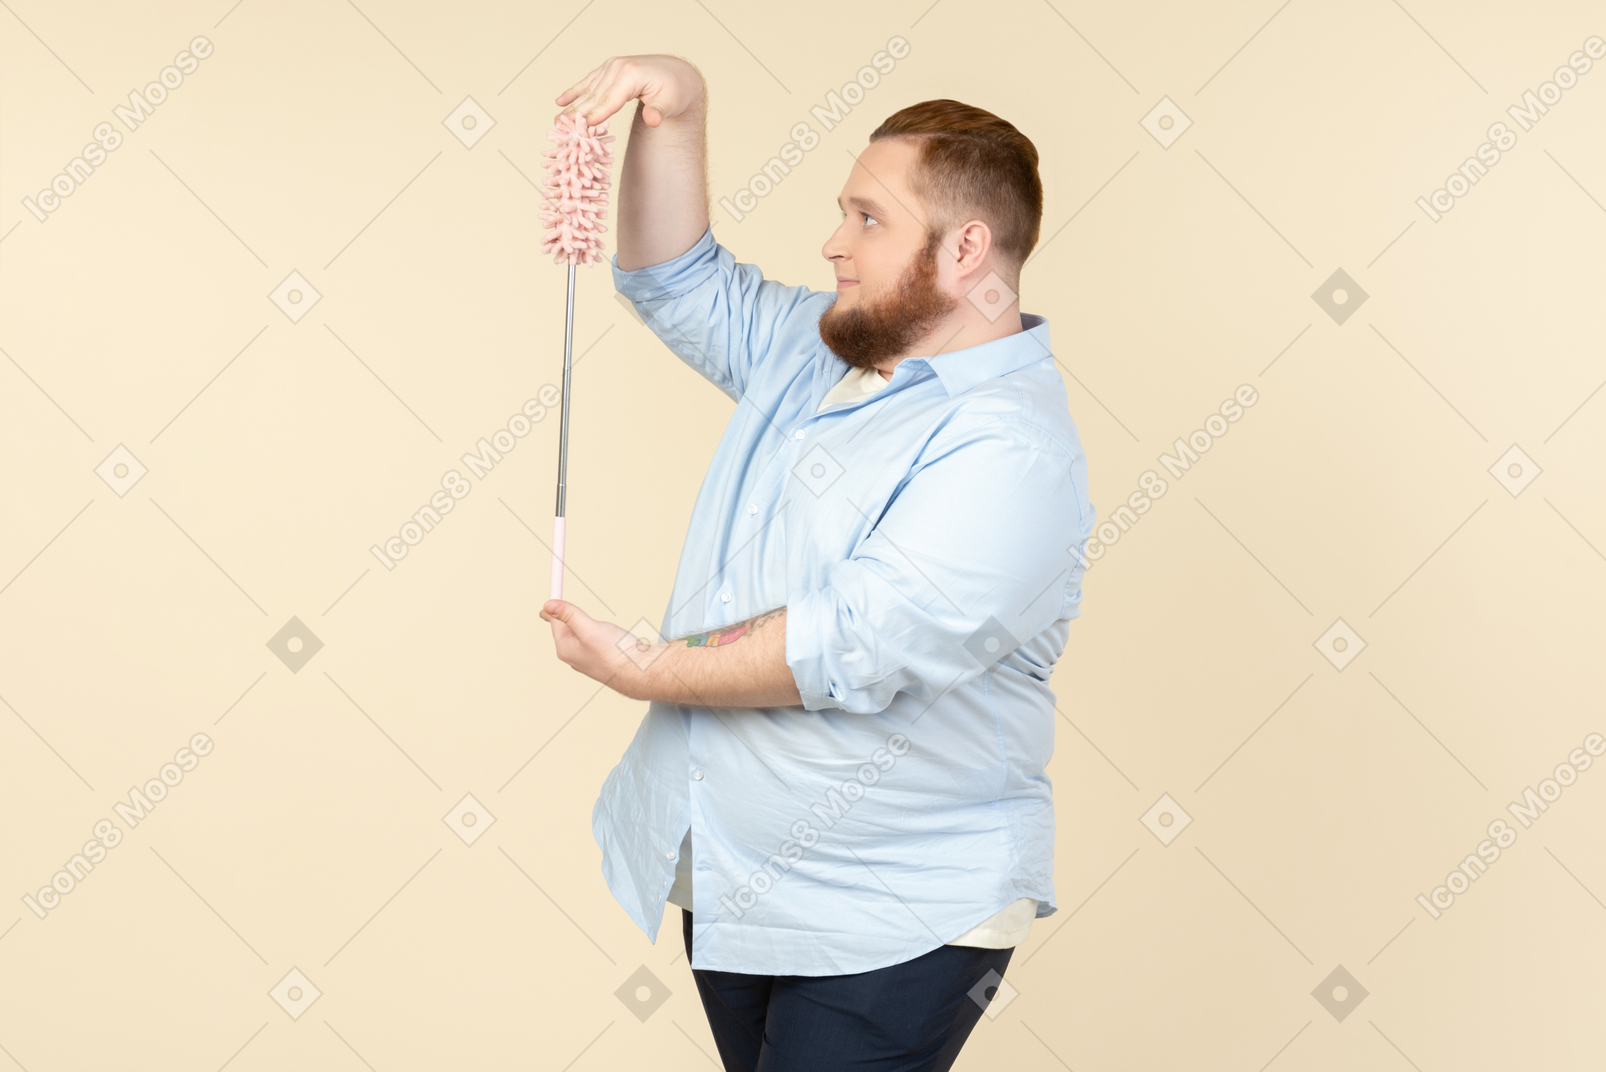 Young overweight househusband holding pipe-cleaner